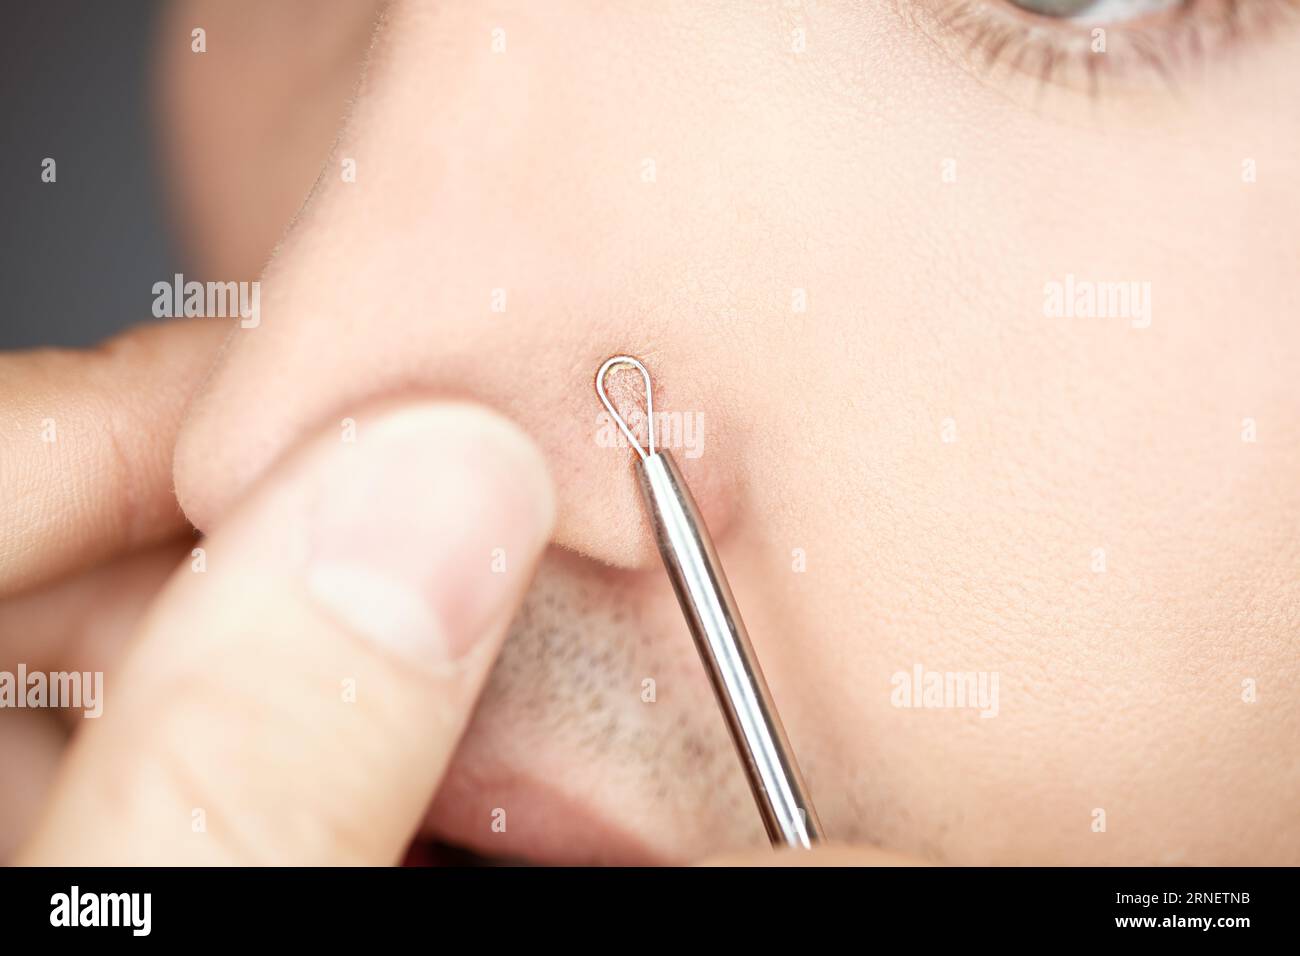 use pimple remover on male skin to care and clean pores and get blackheads out of nose by popping and squeezing them with extractor tool Stock Photo